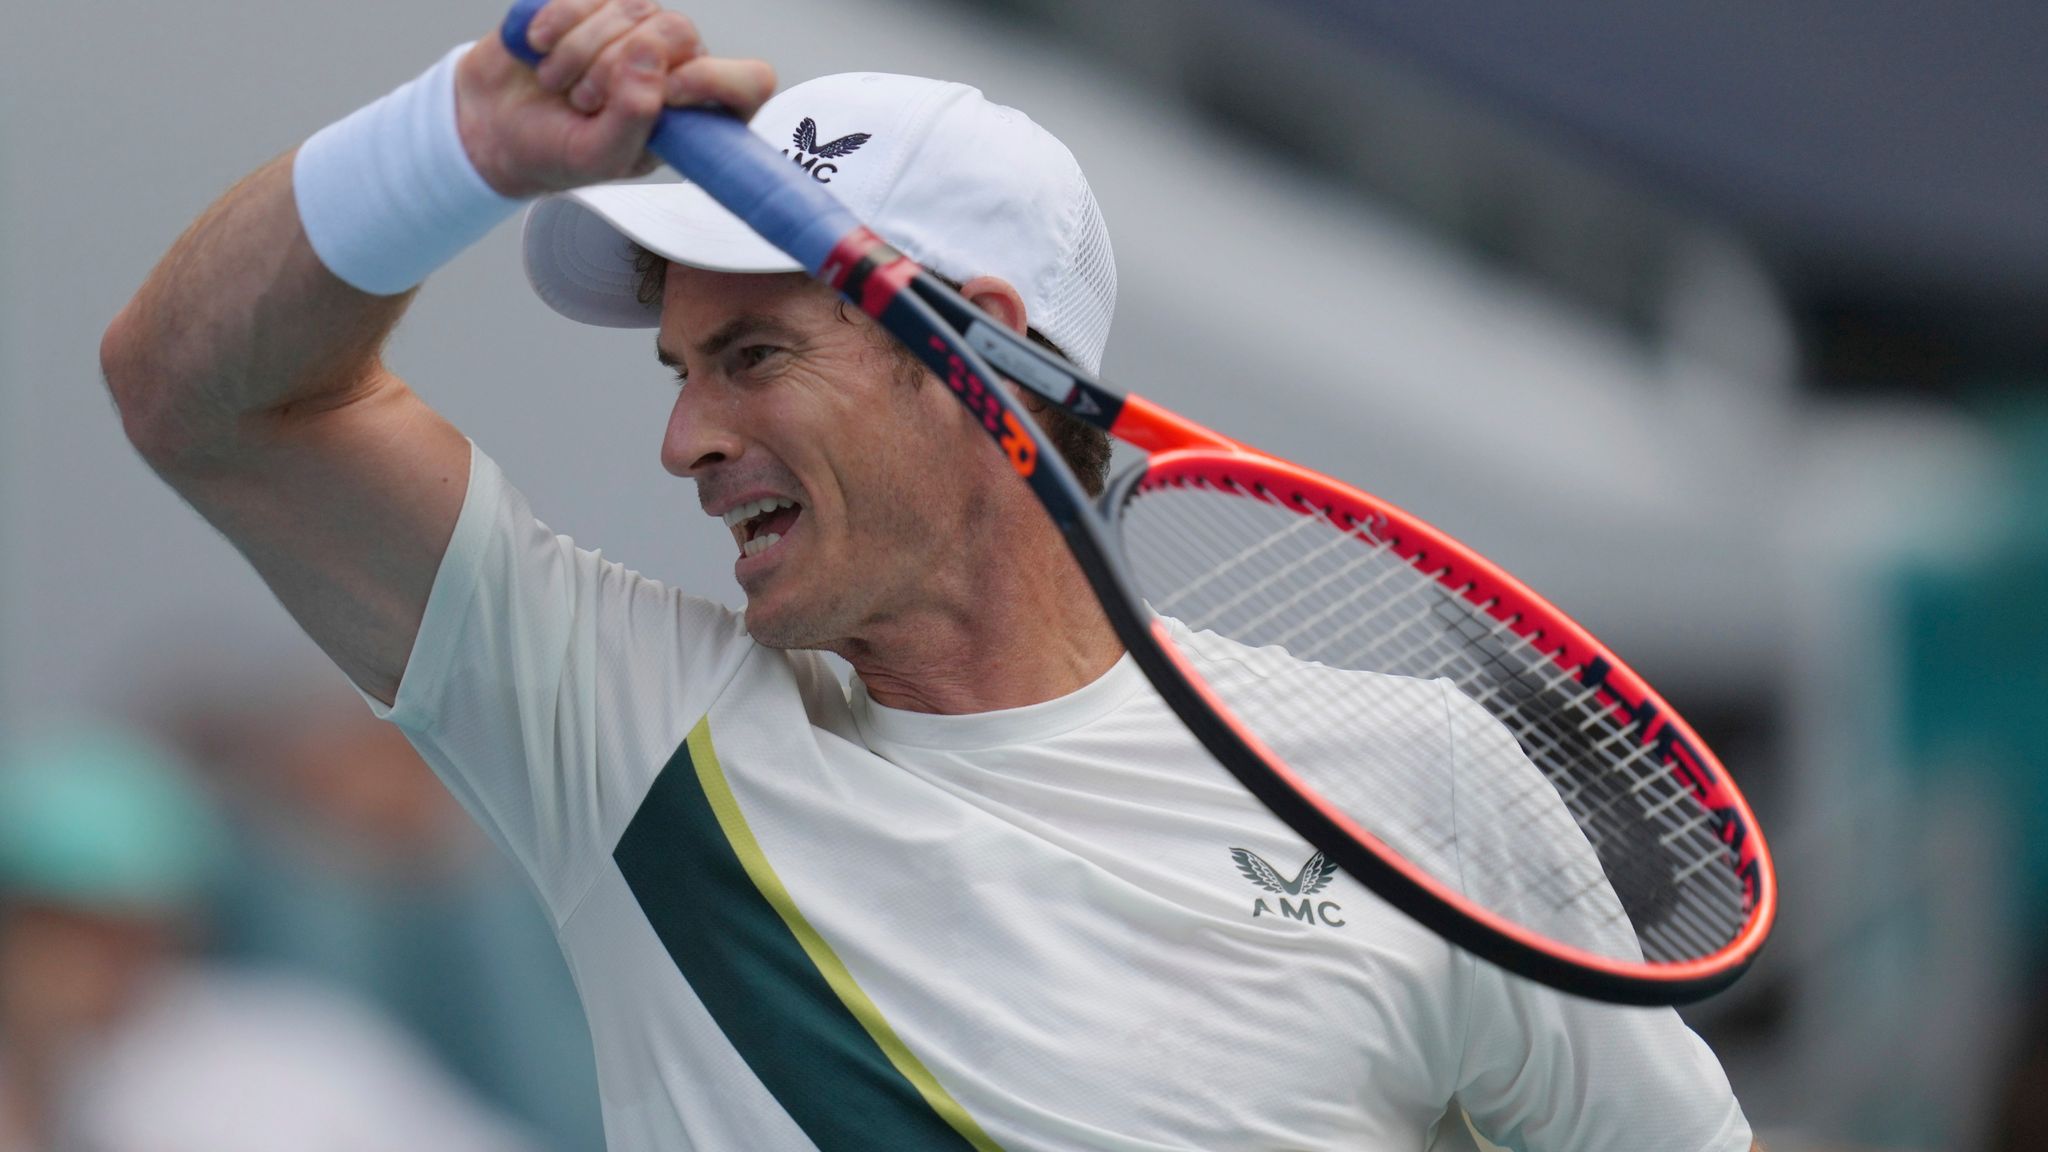 Andy Murray knocked out in first round of Miami Open after straight-sets defeat to Dusan Lajovic Tennis News Sky Sports